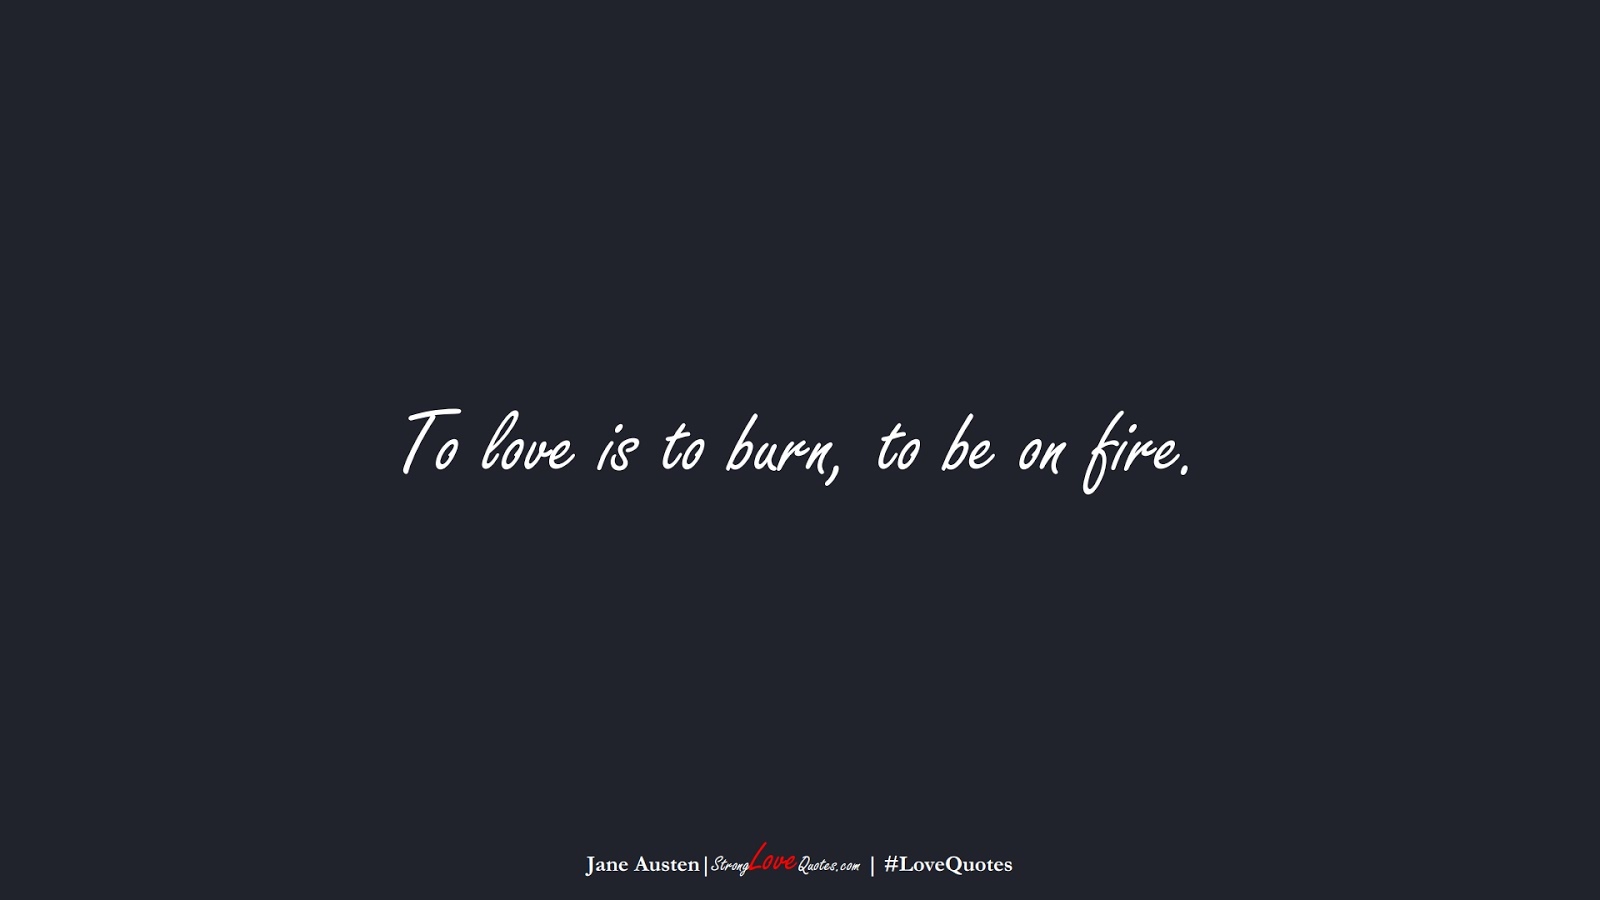 To love is to burn, to be on fire. (Jane Austen);  #LoveQuotes